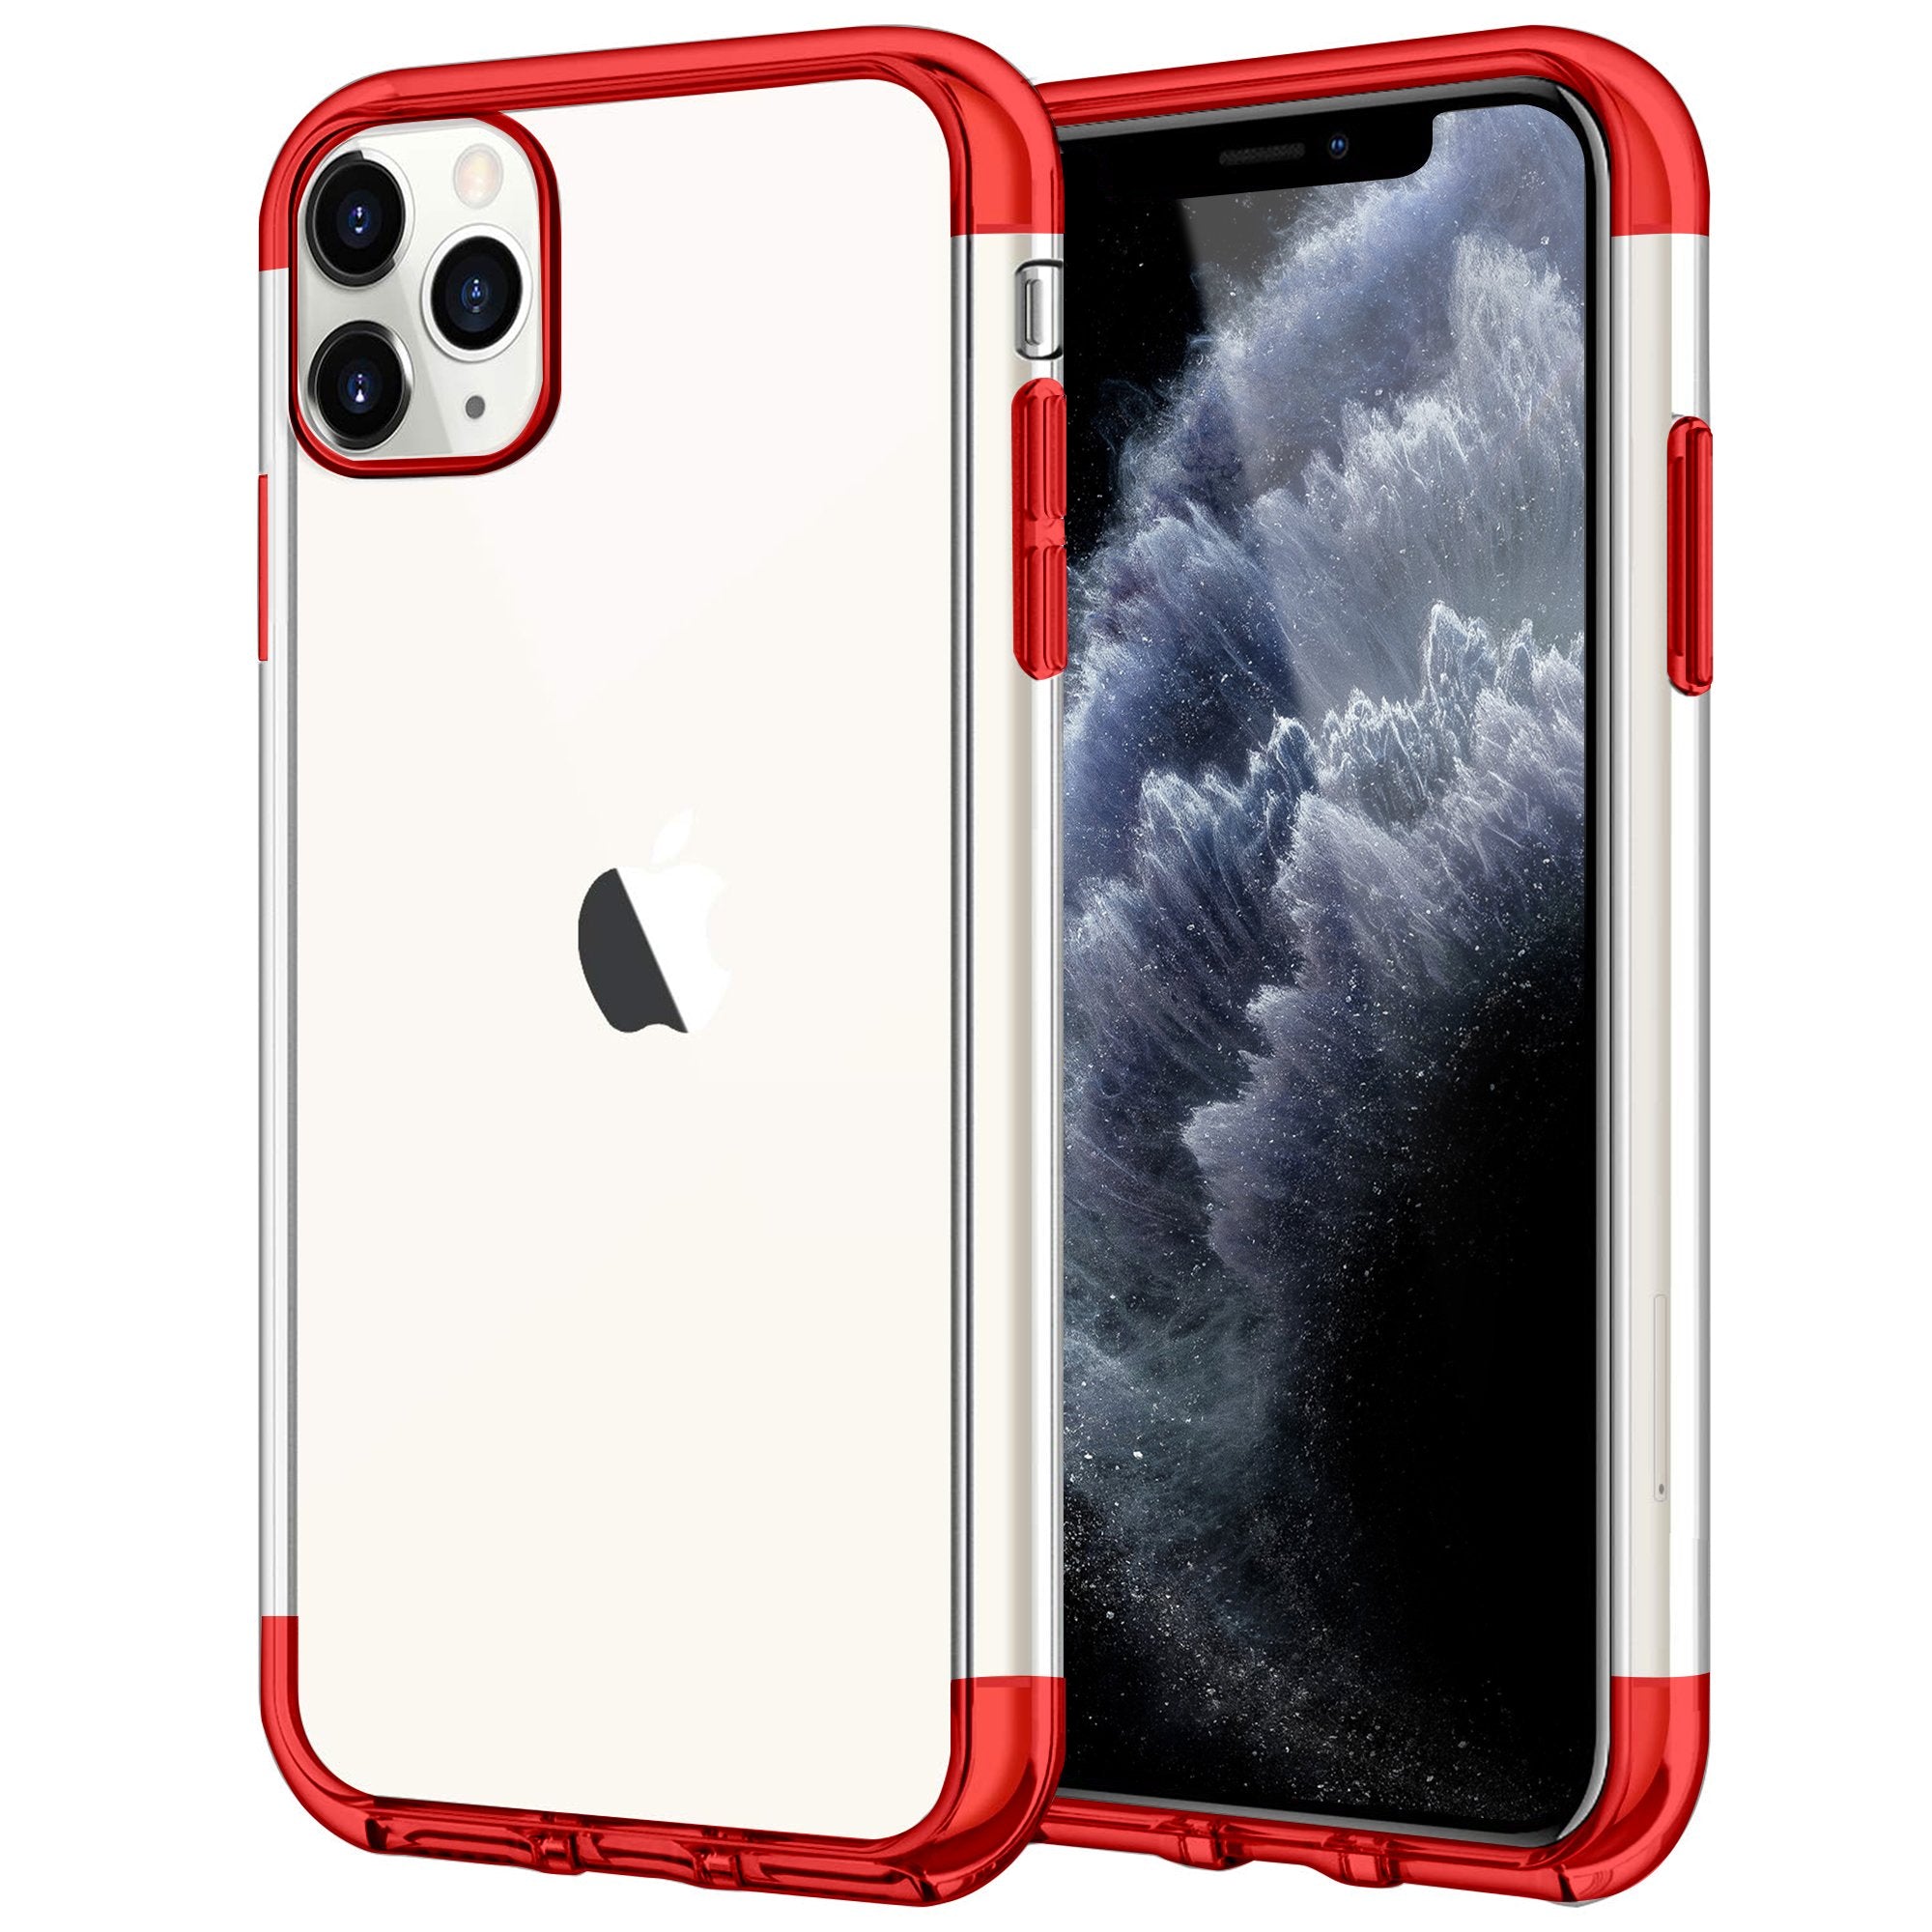 Case for iPhone 11 Pro Max Shock Proof Soft TPU Silicone Phone Clear Slim Cover